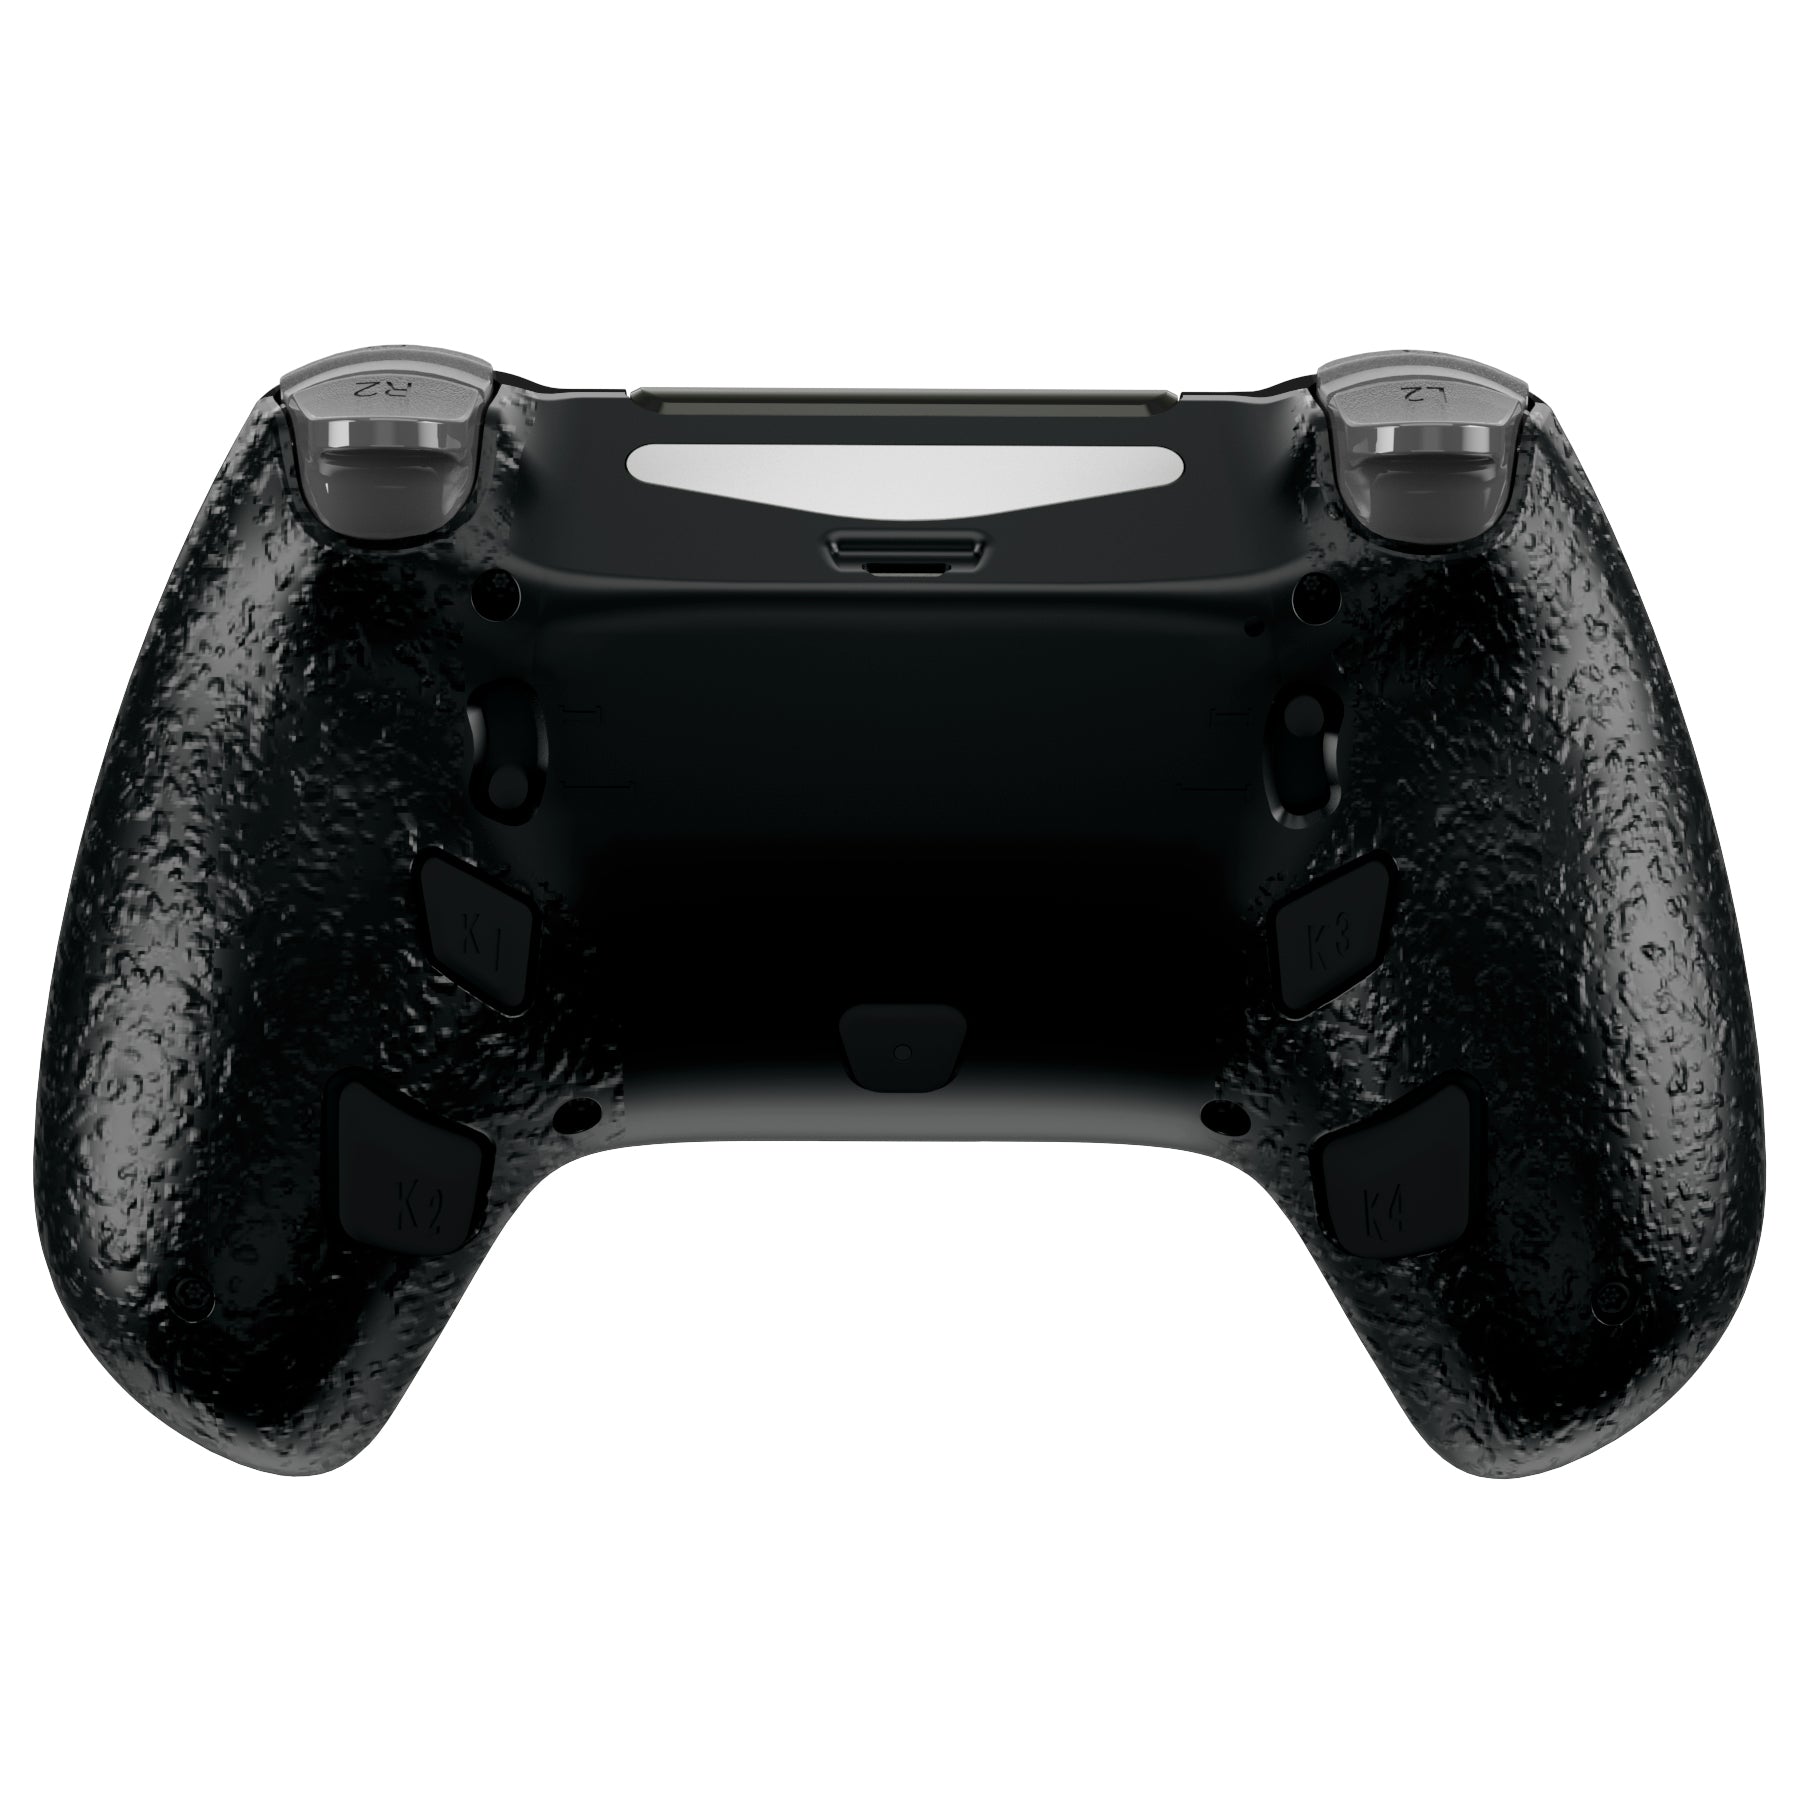 eXtremeRate Retail Black DECADE Tournament Controller (DTC) Upgrade Kit for ps4 Controller JDM-040/050/055, Upgrade Board & Ergonomic Shell & Back Buttons & Trigger Stops - Controller NOT Included - P4MG002